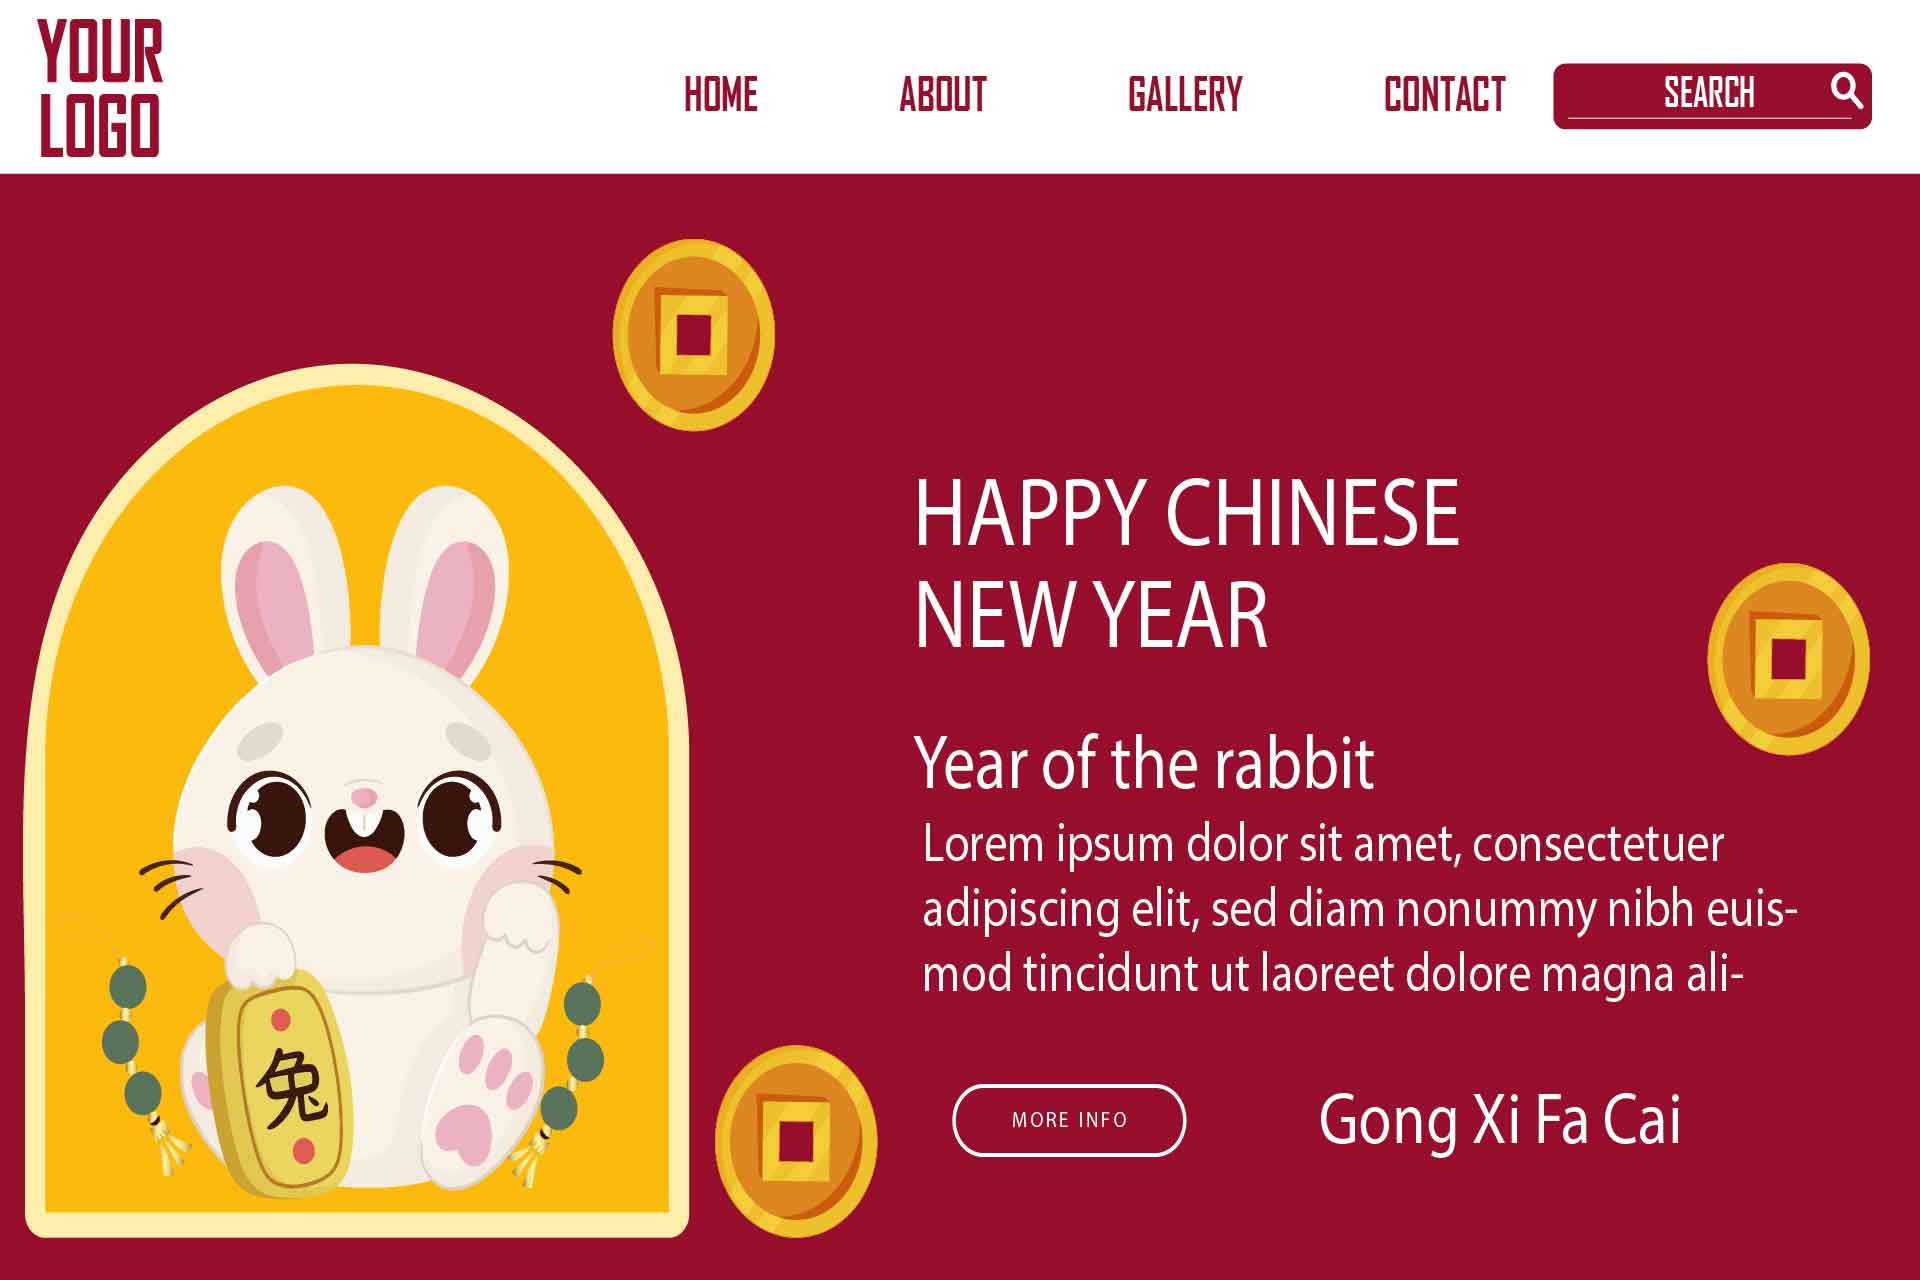 Chinese New Year Landing Pages Lunar Bundle pinterest image.